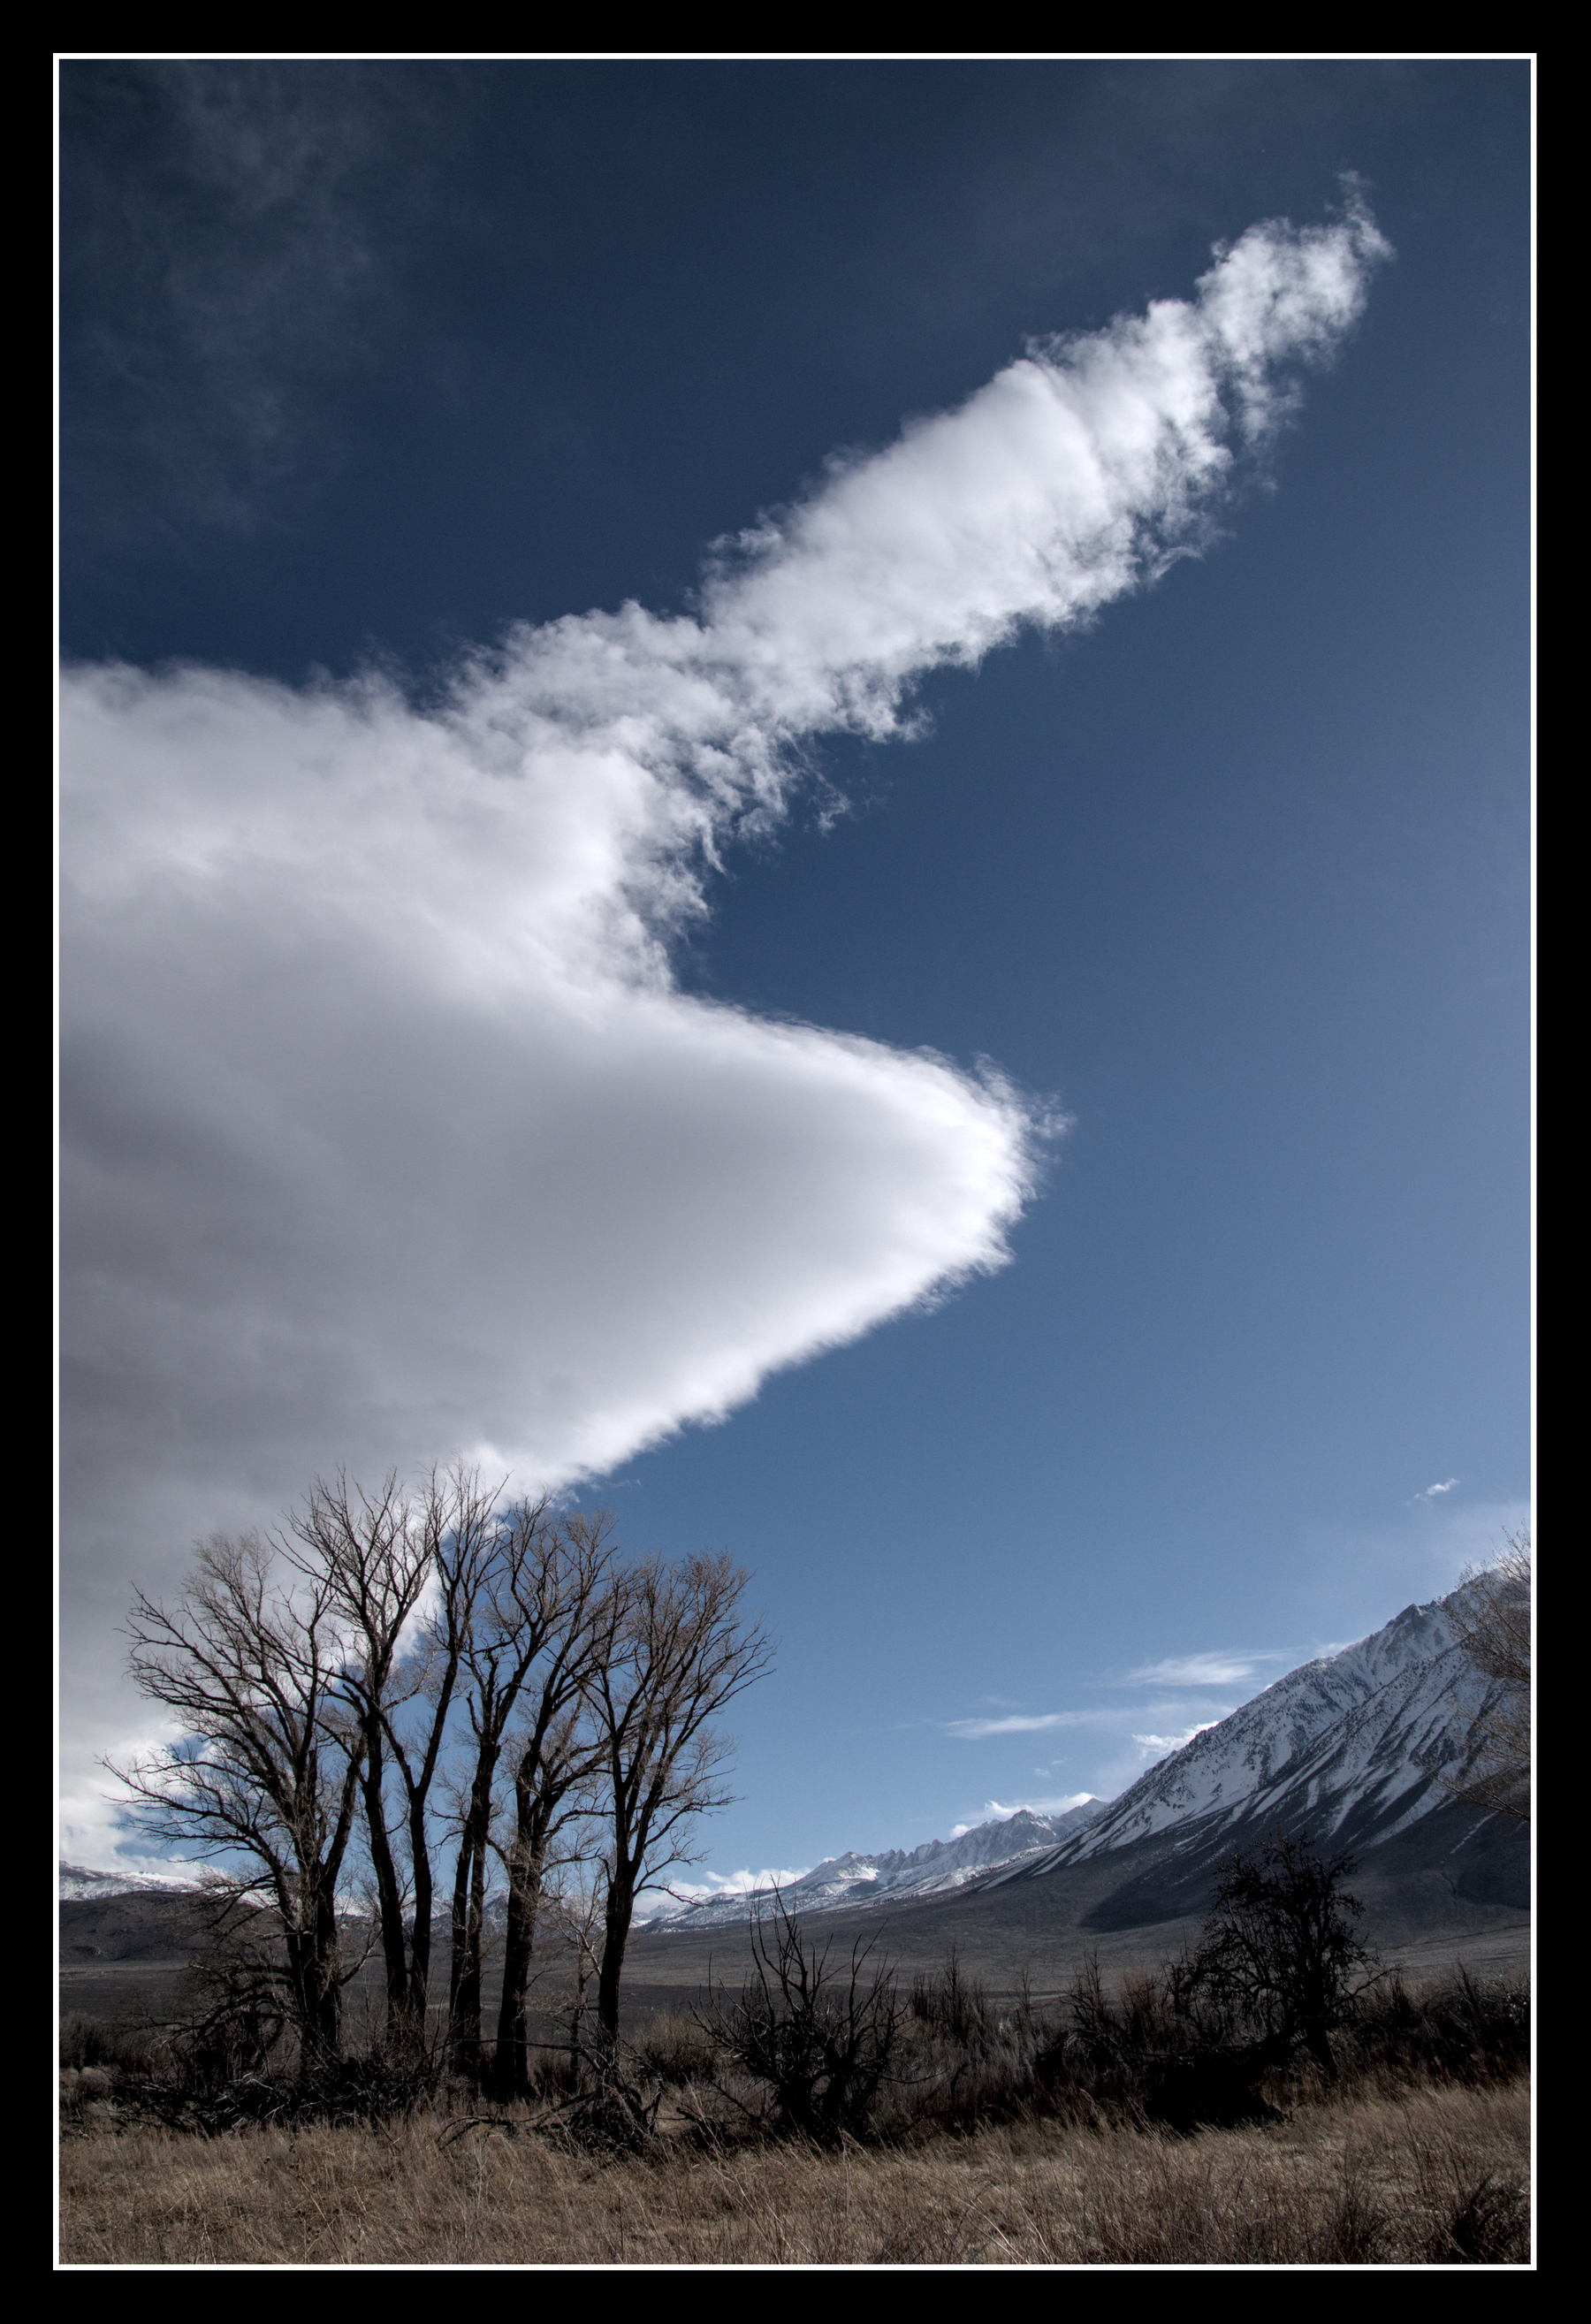 A puffy white cloud in the sky has a large pointy section protruding upwards, making it resemble a narwhal.